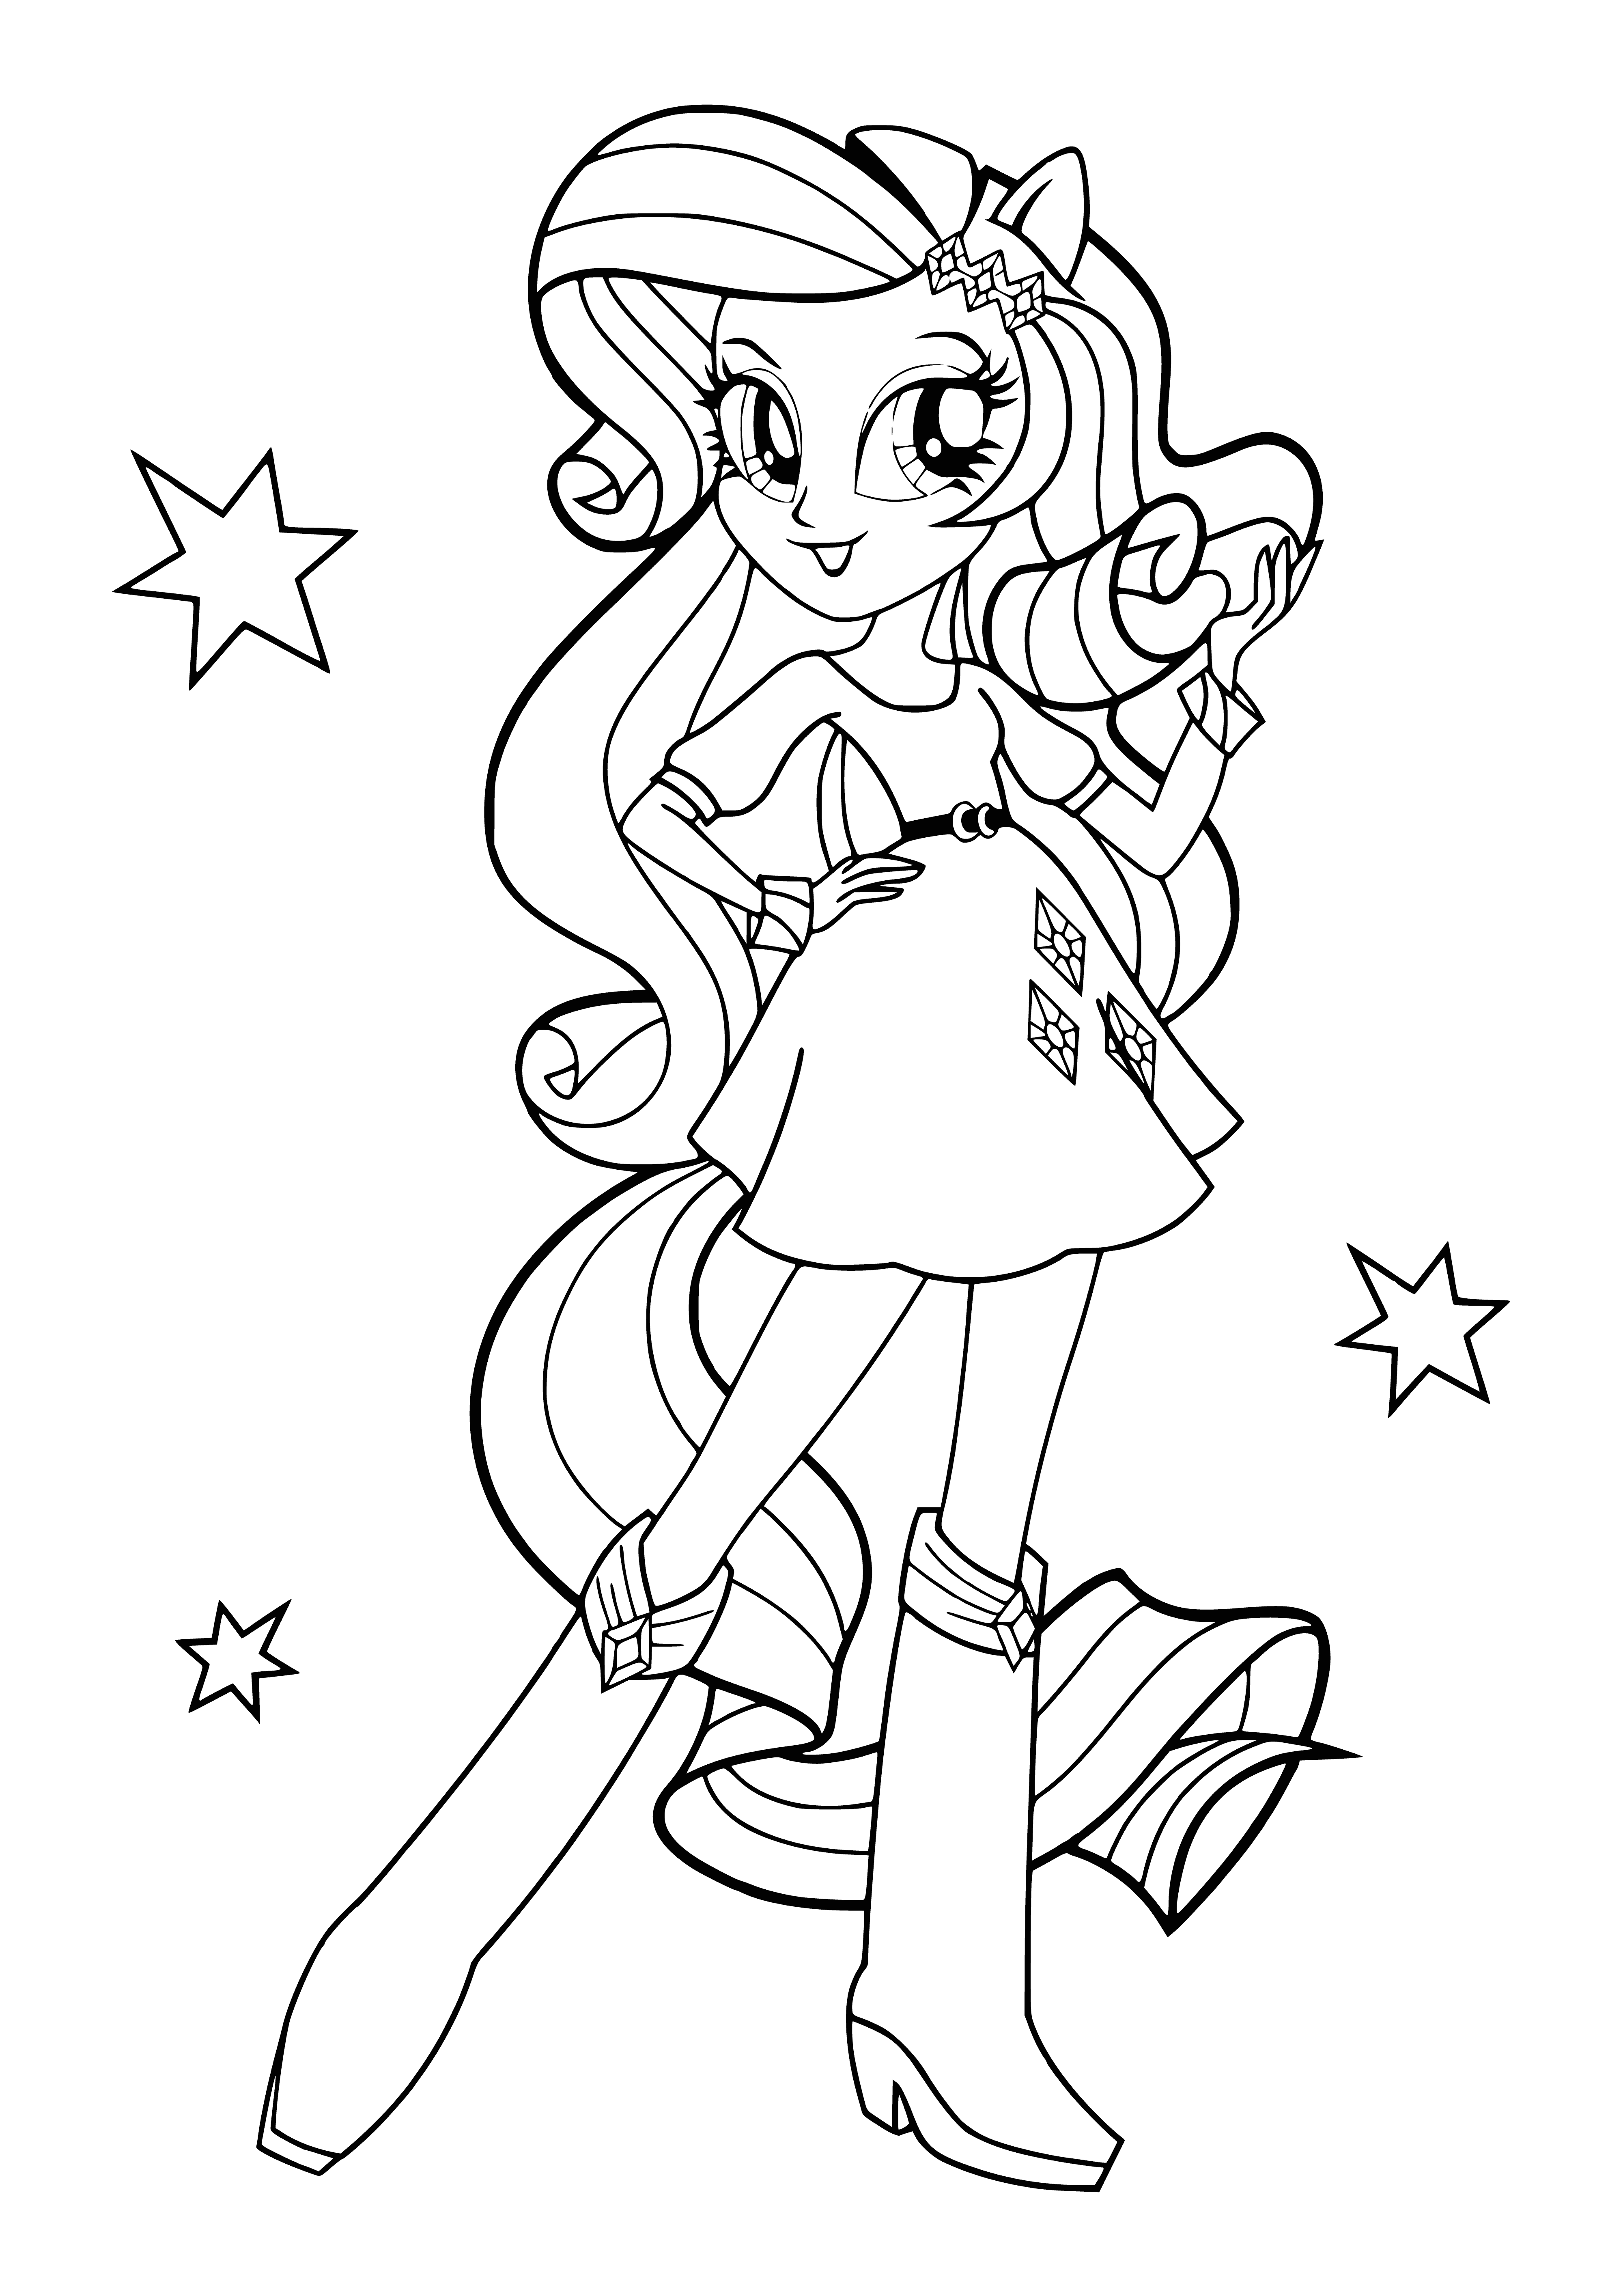 coloring page: A girl with long, pink & purple mane & light purple coat. Wearing jeweled necklace and headband, purple eyeshadow & bandanna.